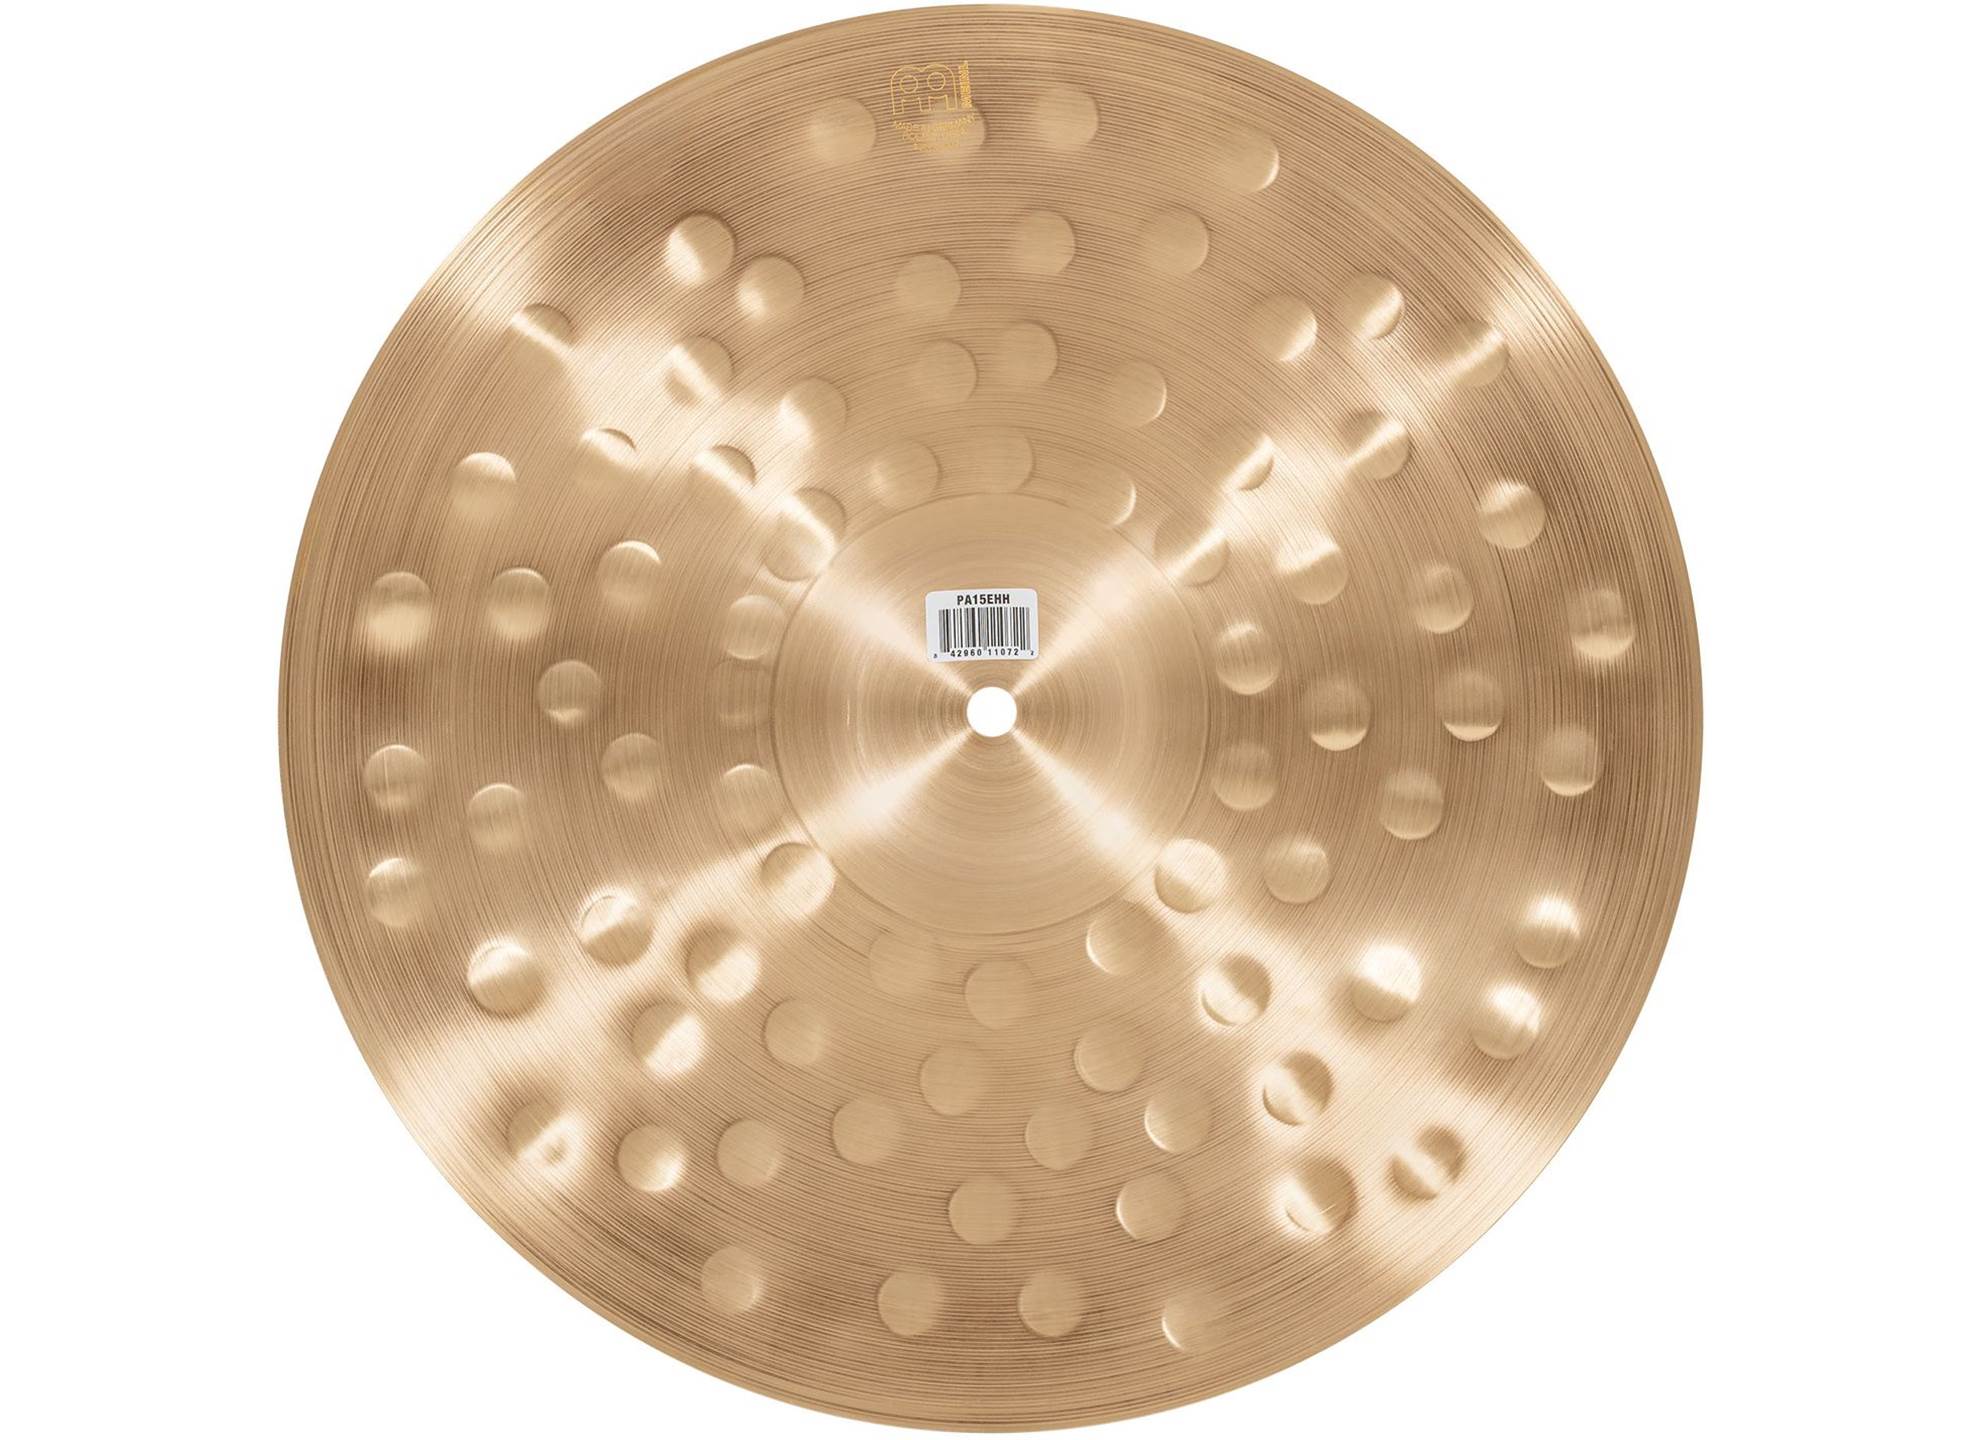 PA15EHH Pure Alloy 15-tum Extra Hammered Hi-hat